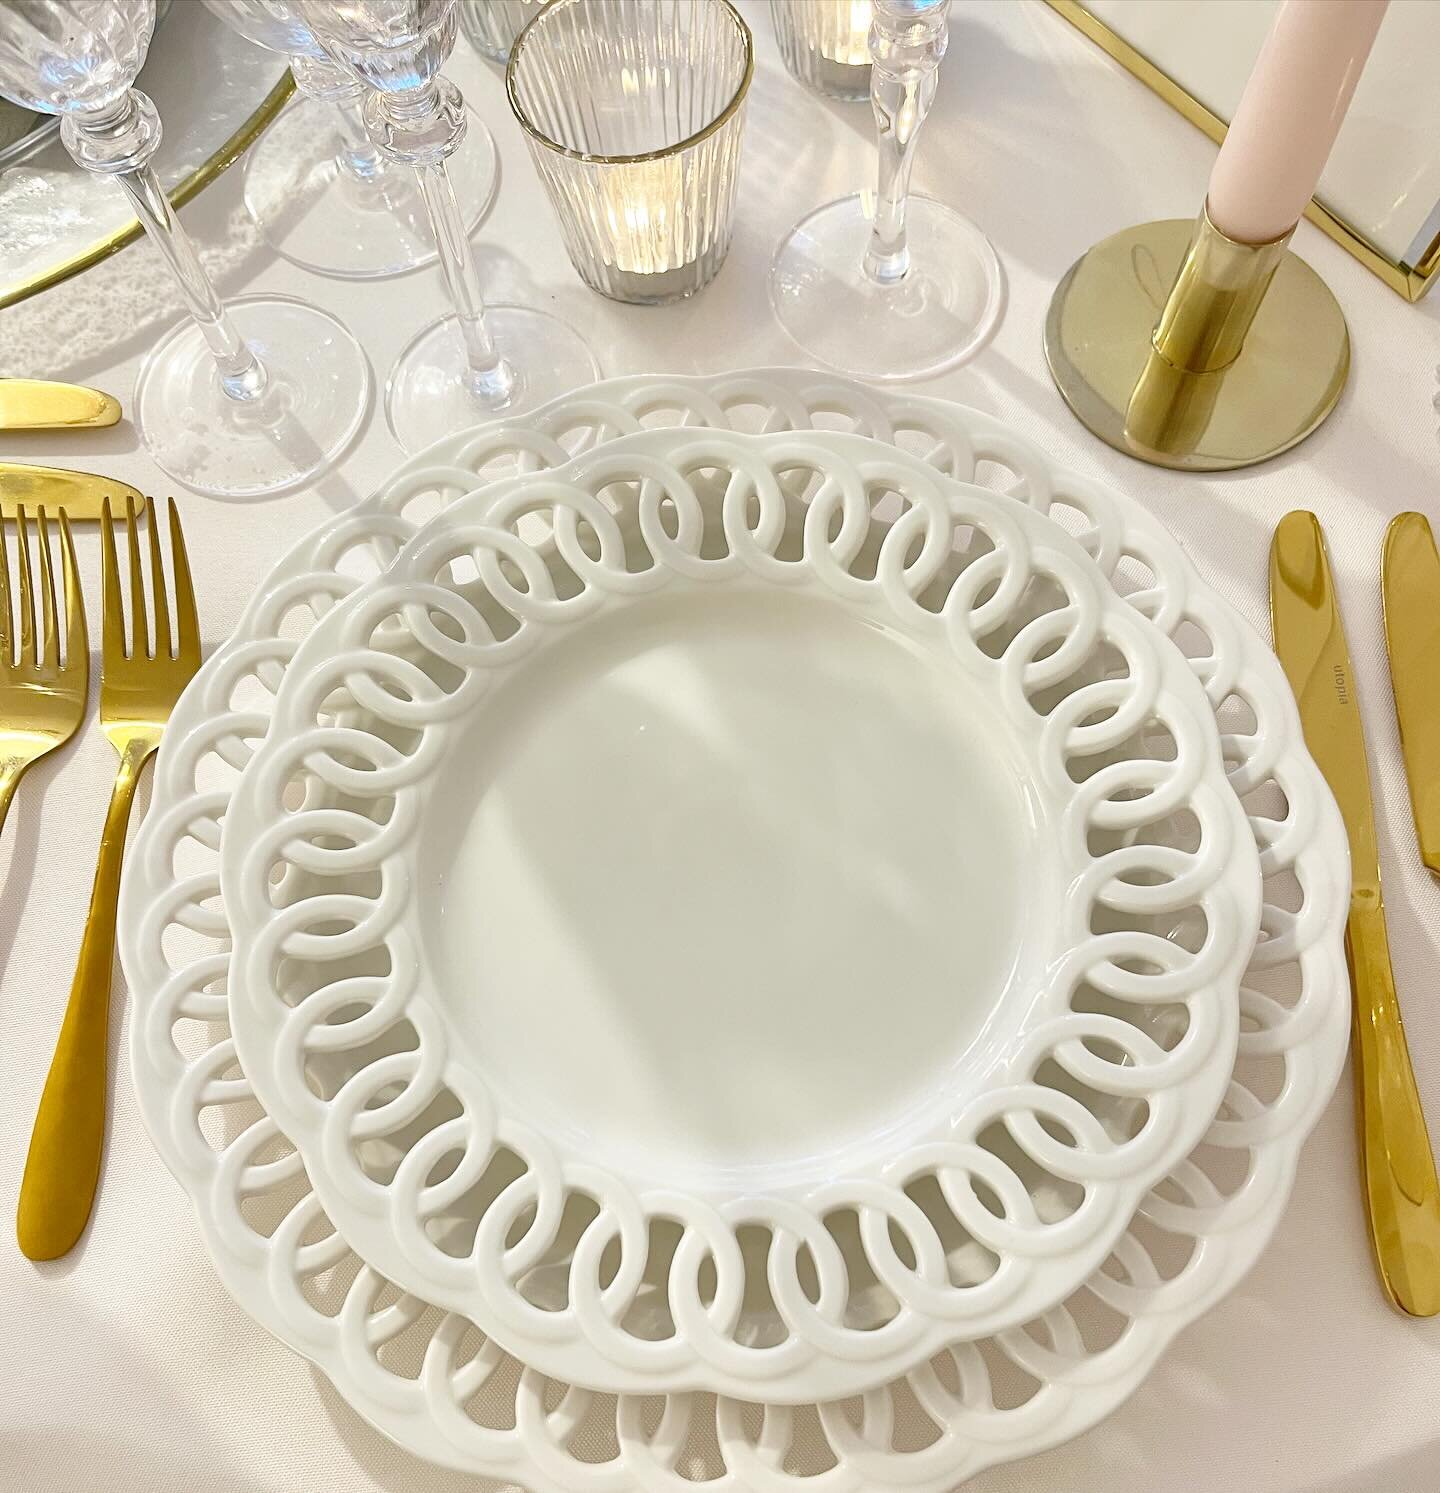 Place settings contribute significantly to the styling of a wedding, reflecting the couple&rsquo;s theme and vision. From the choice of table linens to the arrangement of cutlery, glassware and touches like name cards or personalised menus, each deta